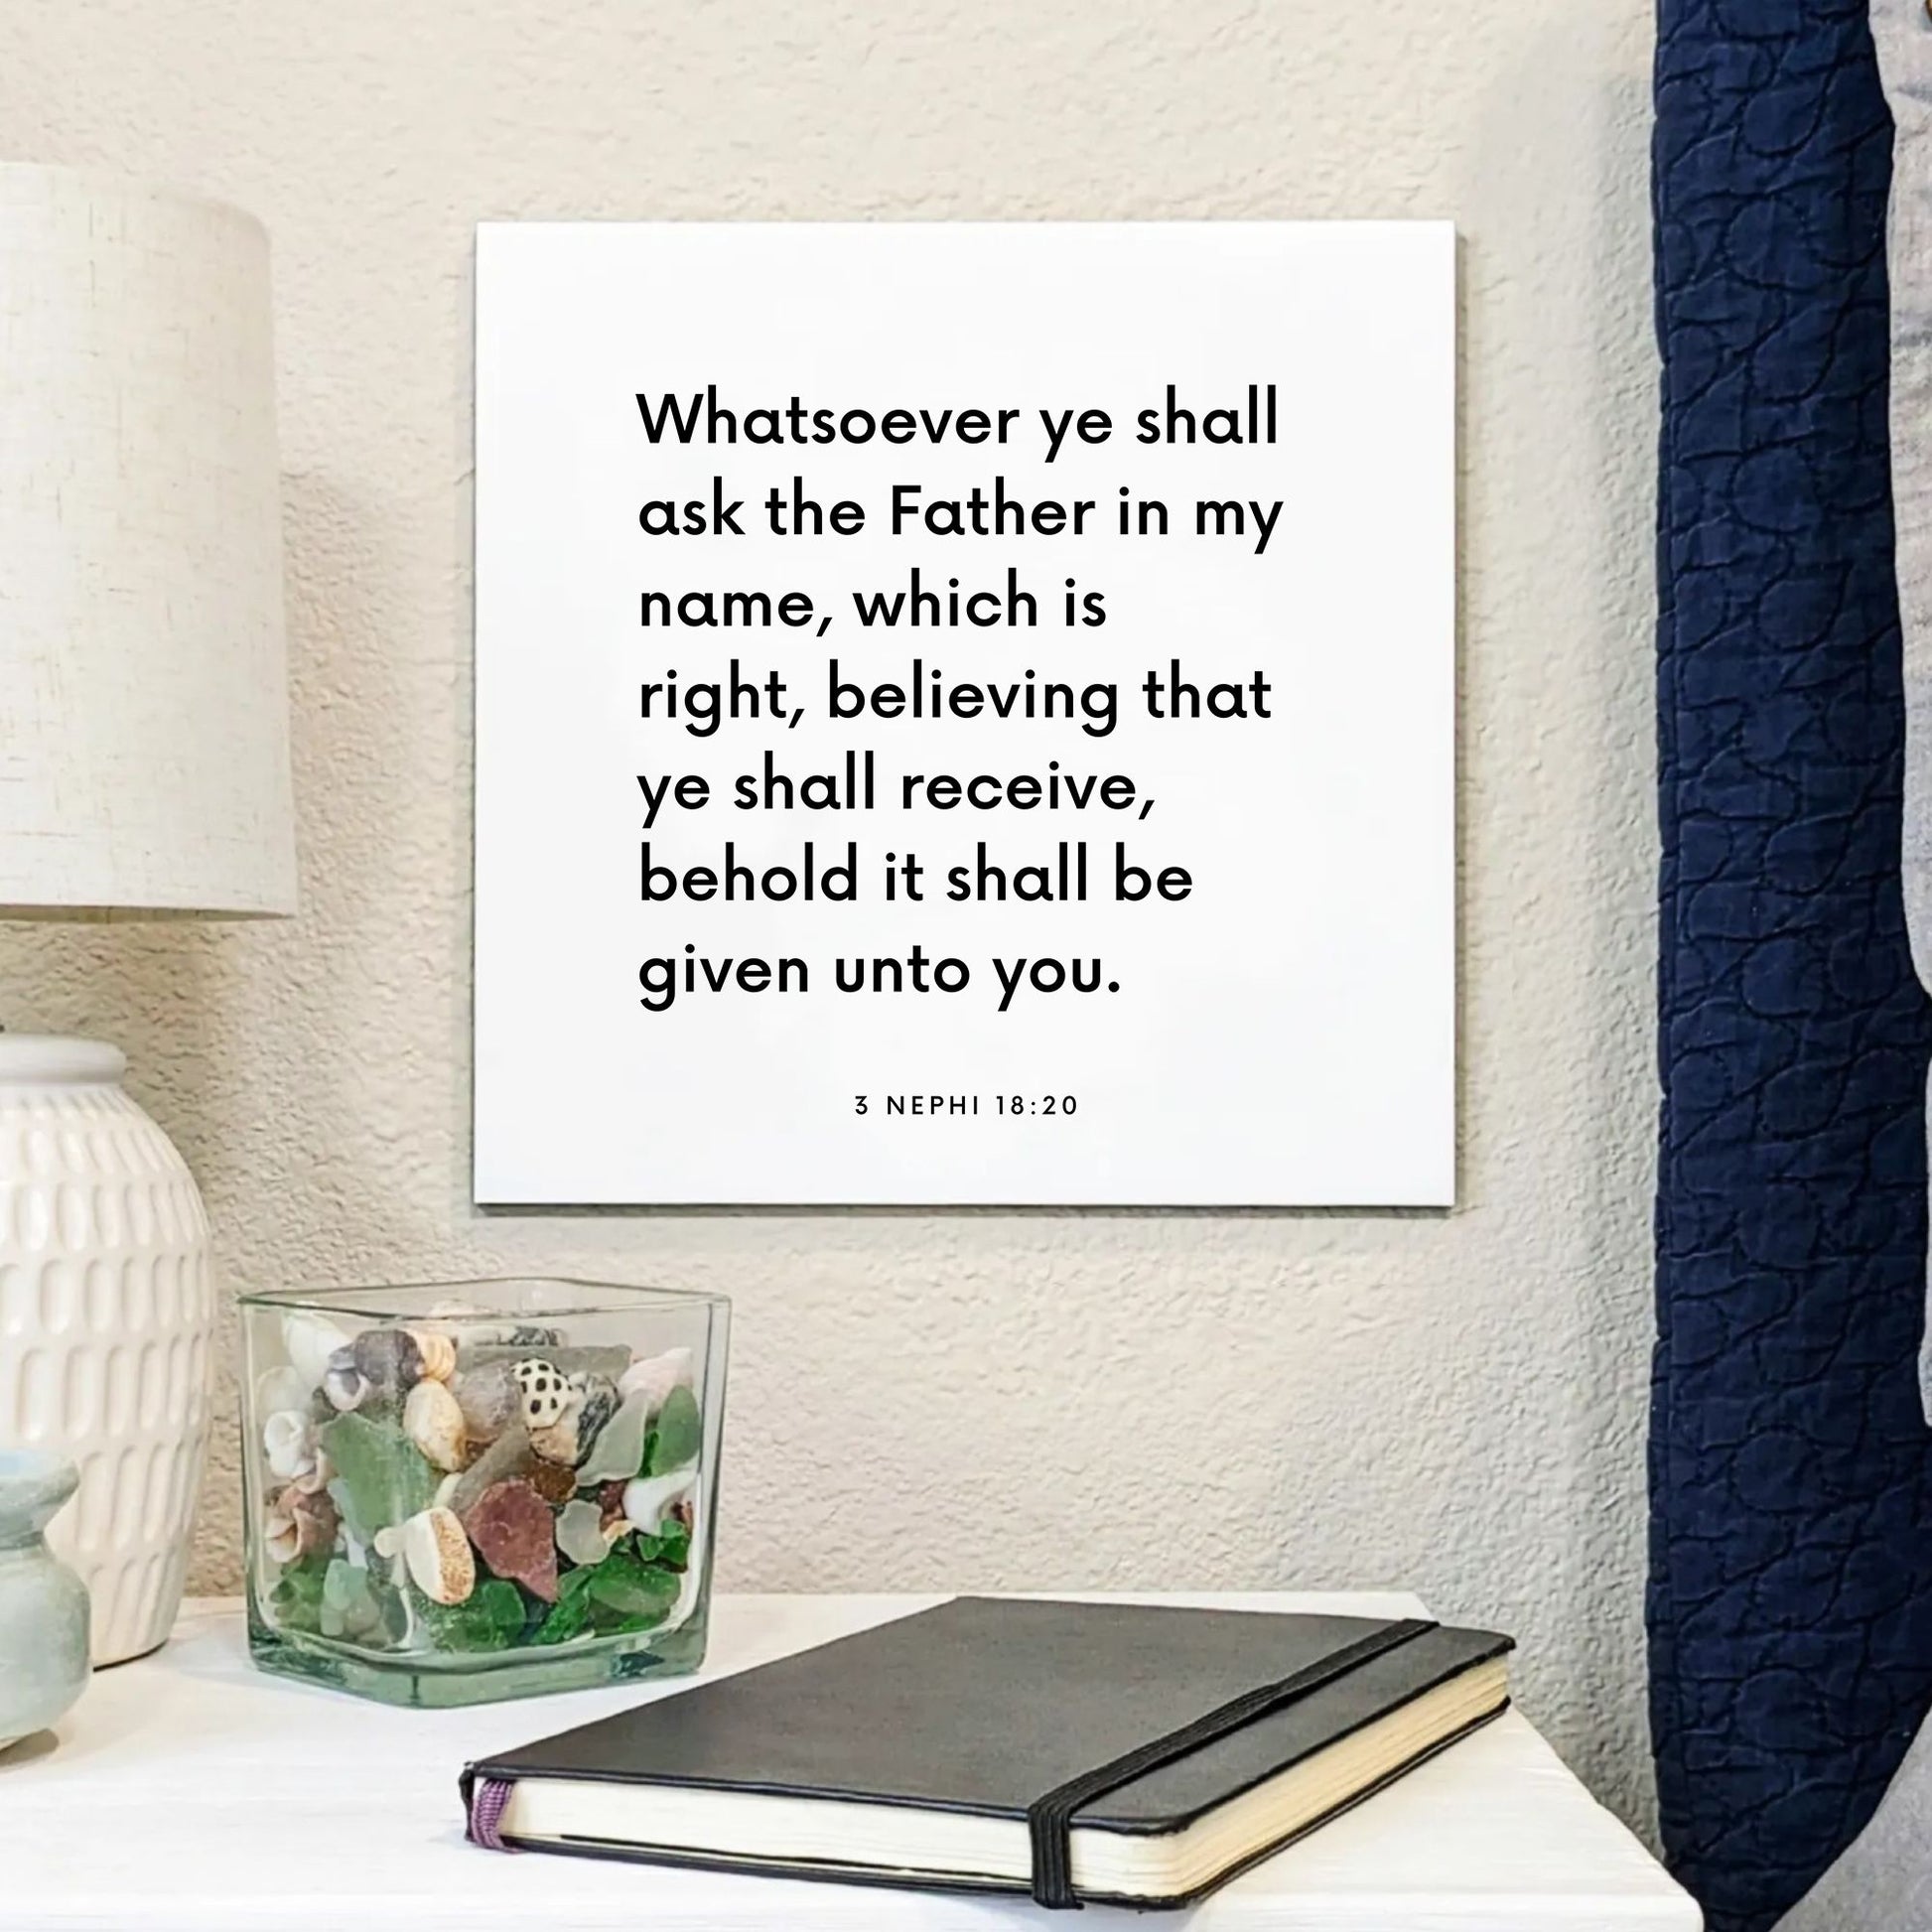 Bedside mouting of the scripture tile for 3 Nephi 18:20 - "Whatsoever ye shall ask the Father in my name"